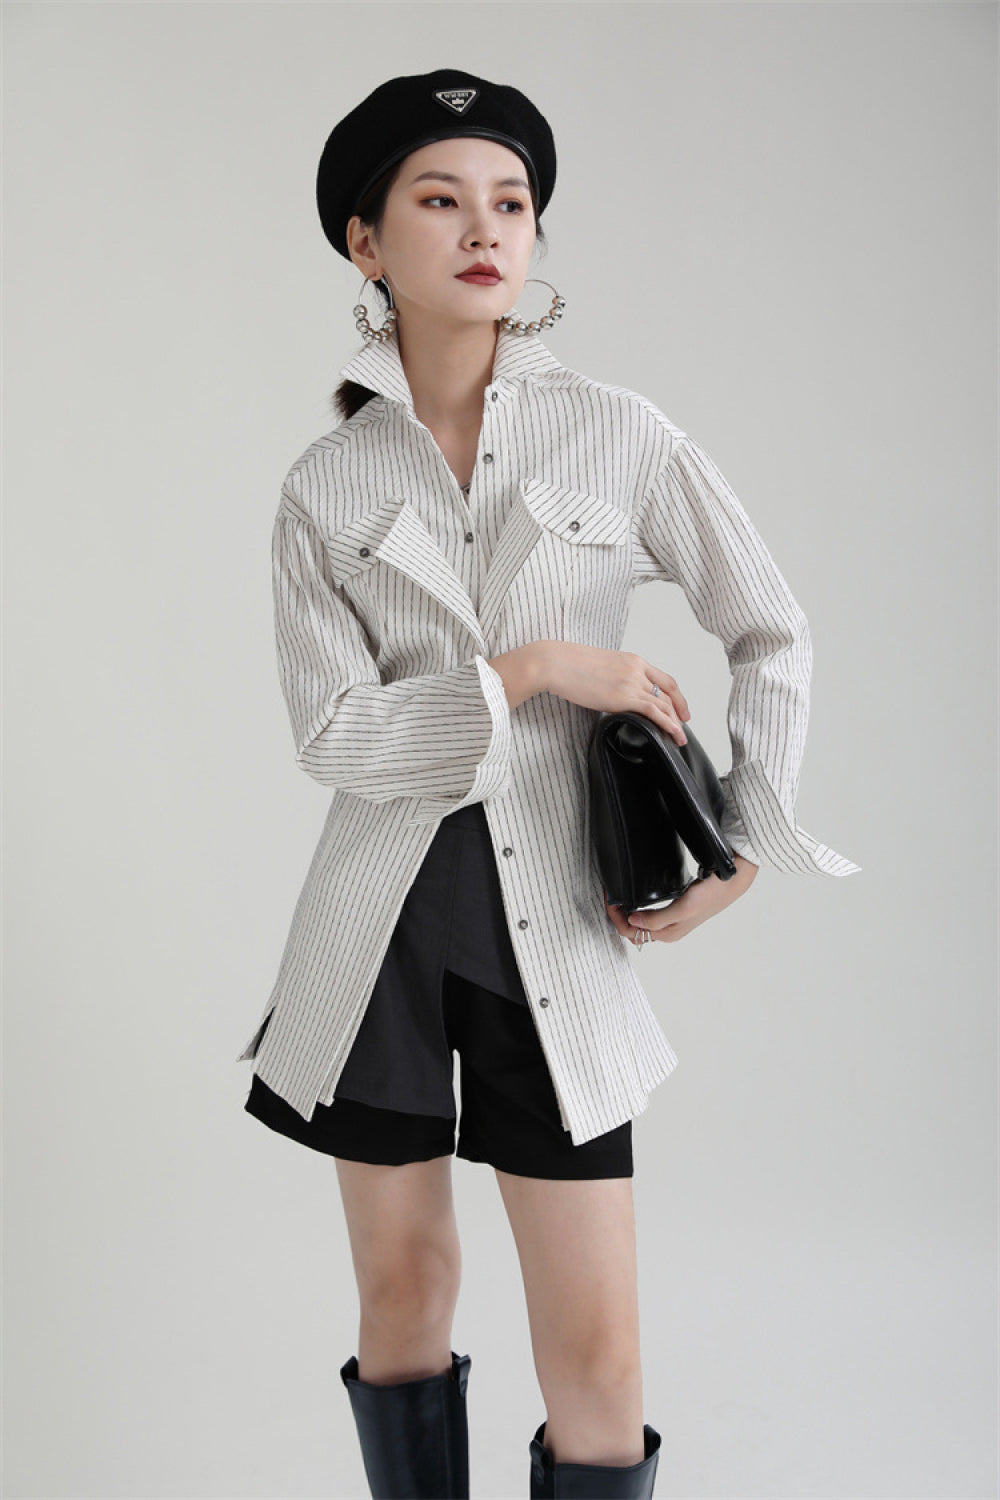 Striped Collared Long Sleeve Shirt